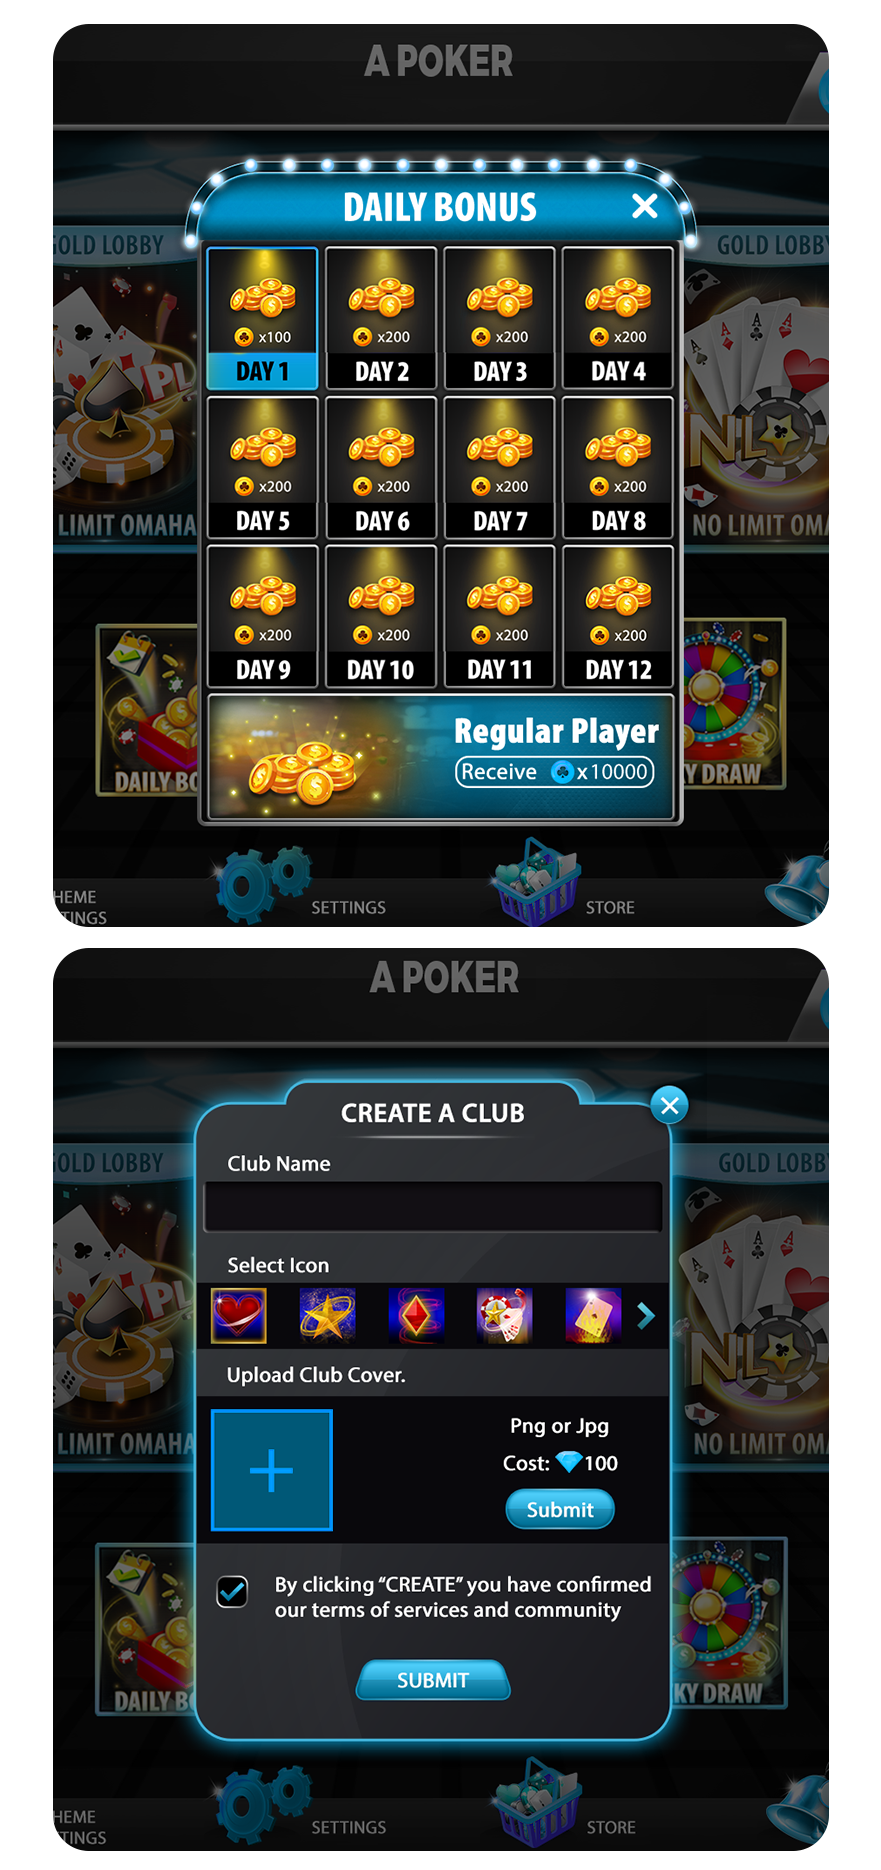 ZYNGA POKER FEATURES FOR THE PLAYERS